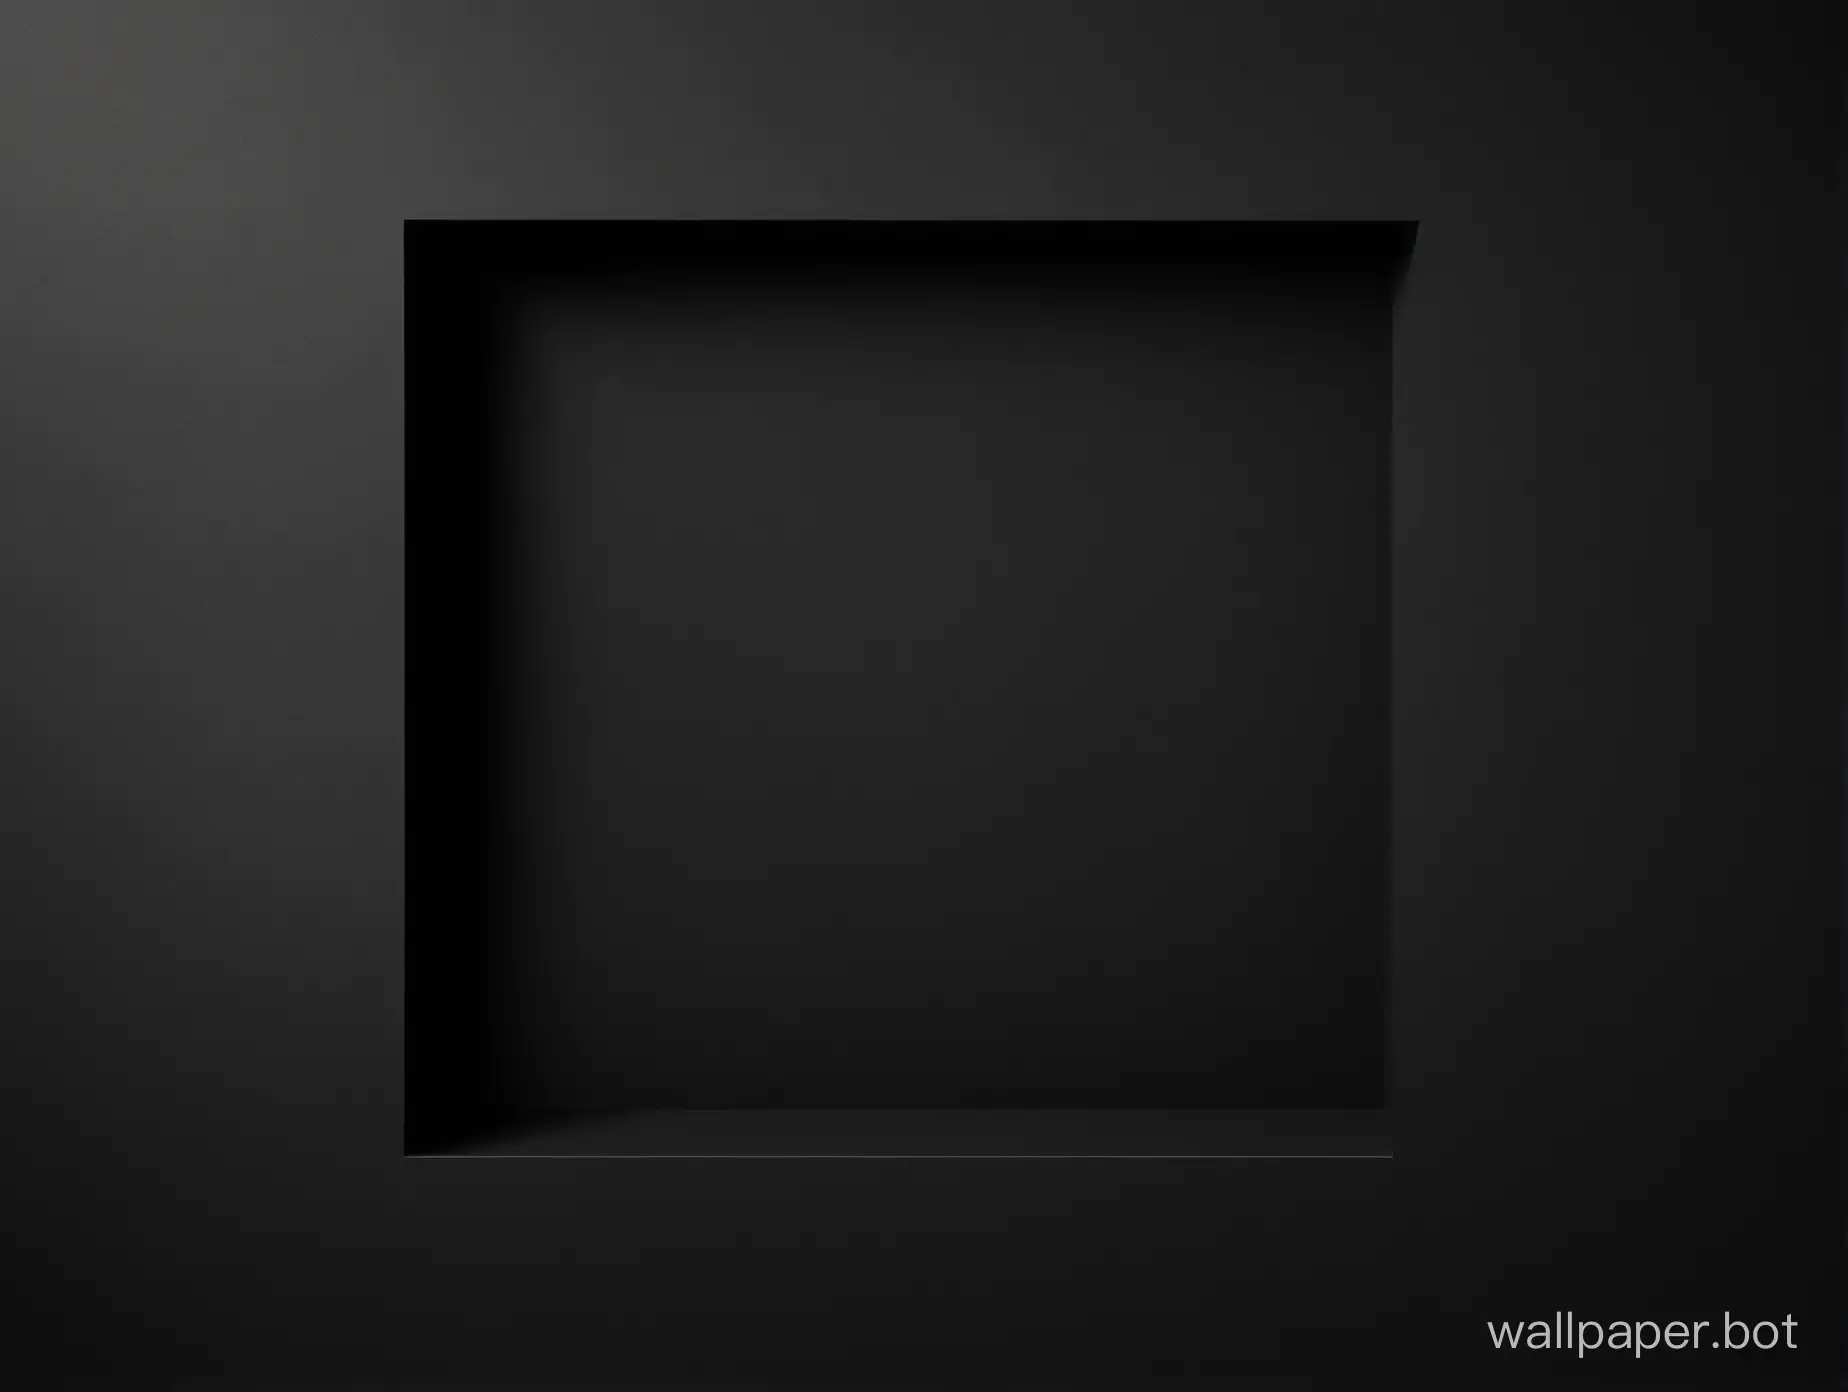 Minimalist-Dark-Paper-Space-with-Negative-Space-Composition